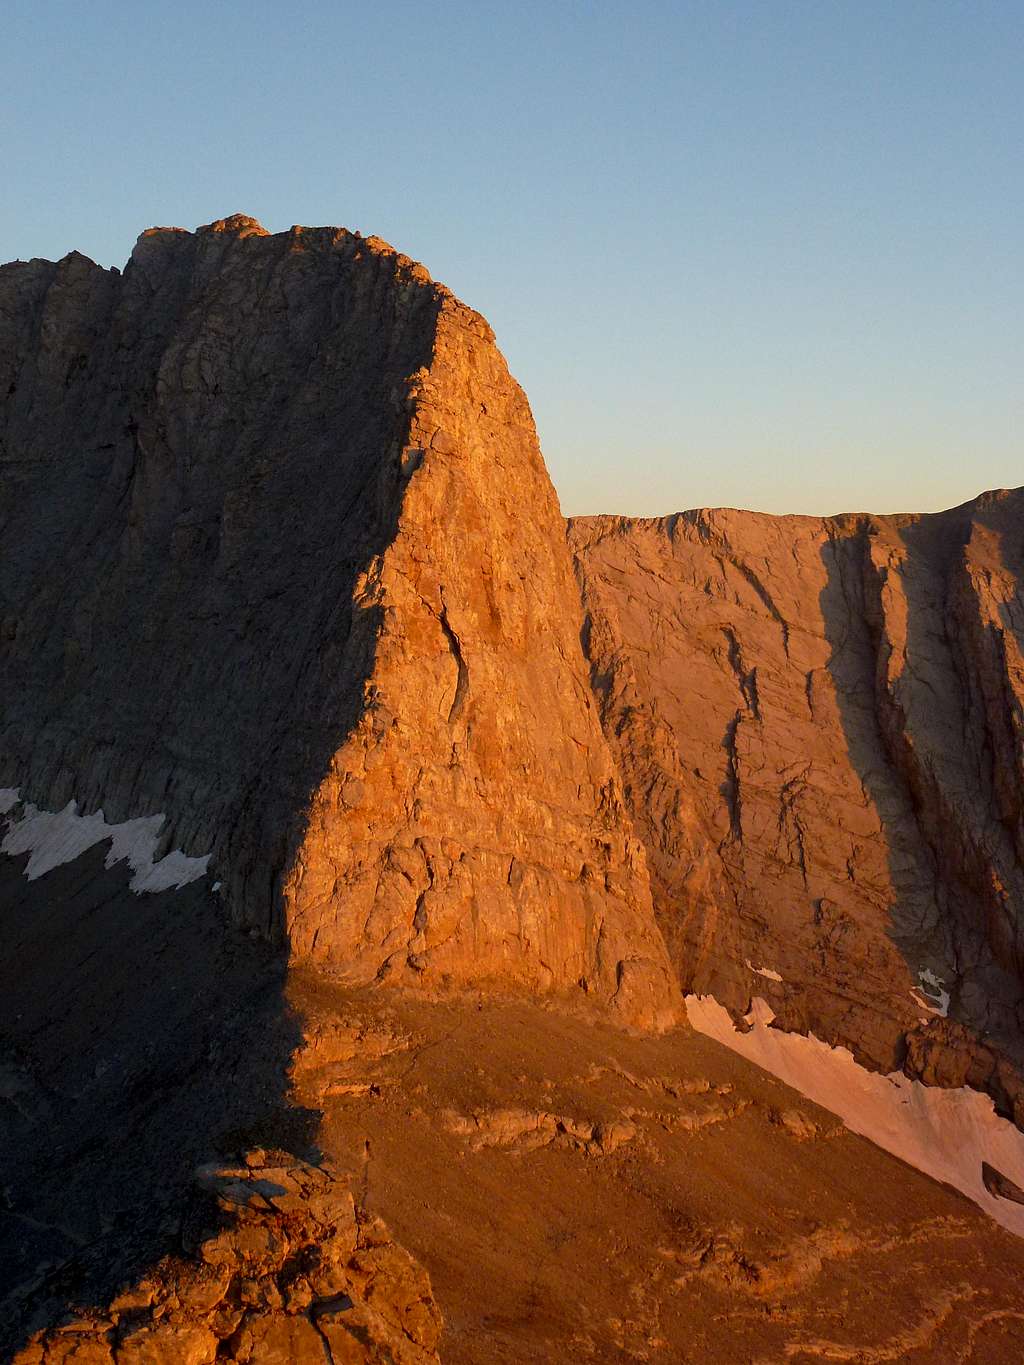 The north face of Stefani at sunset